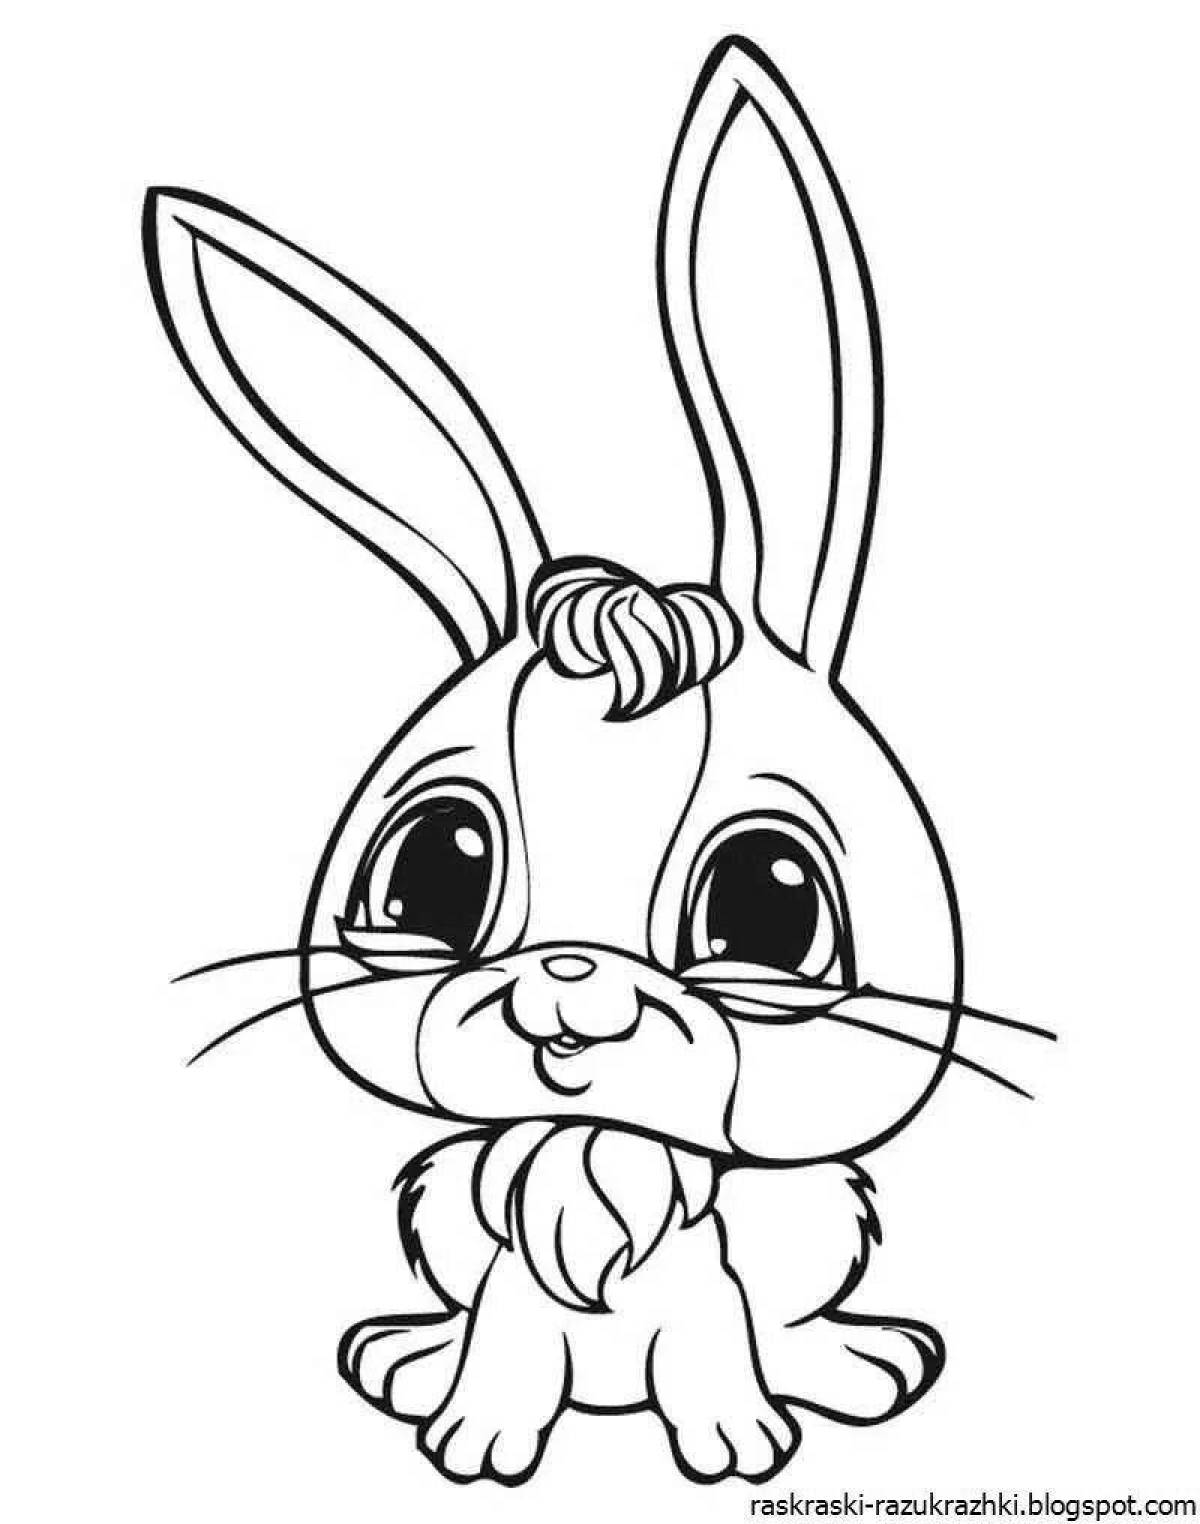 A funny rabbit coloring book for kids